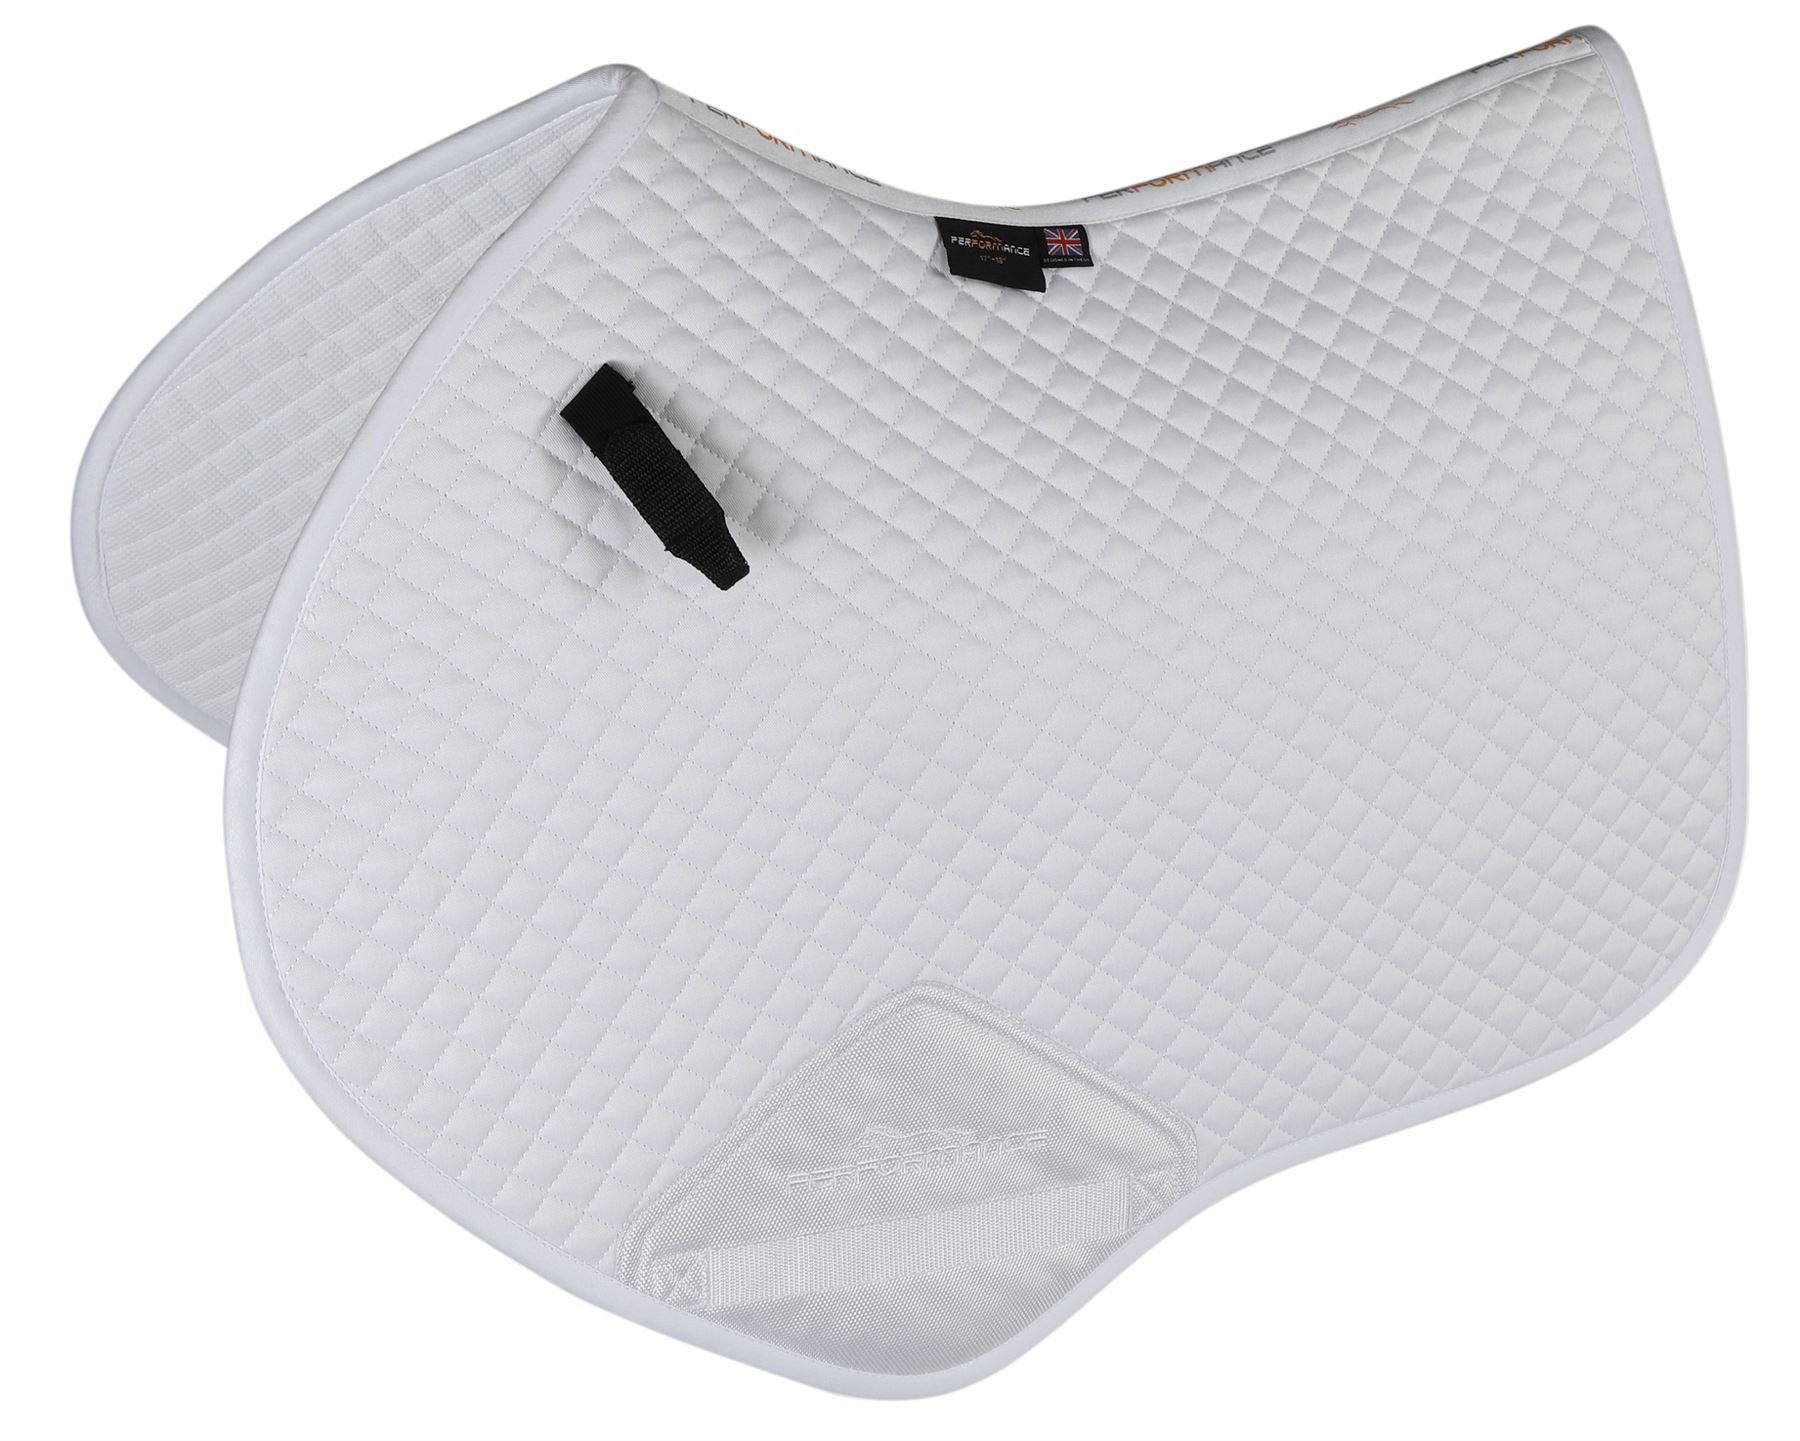 Shires Performance Jump Saddlecloth - Just Horse Riders